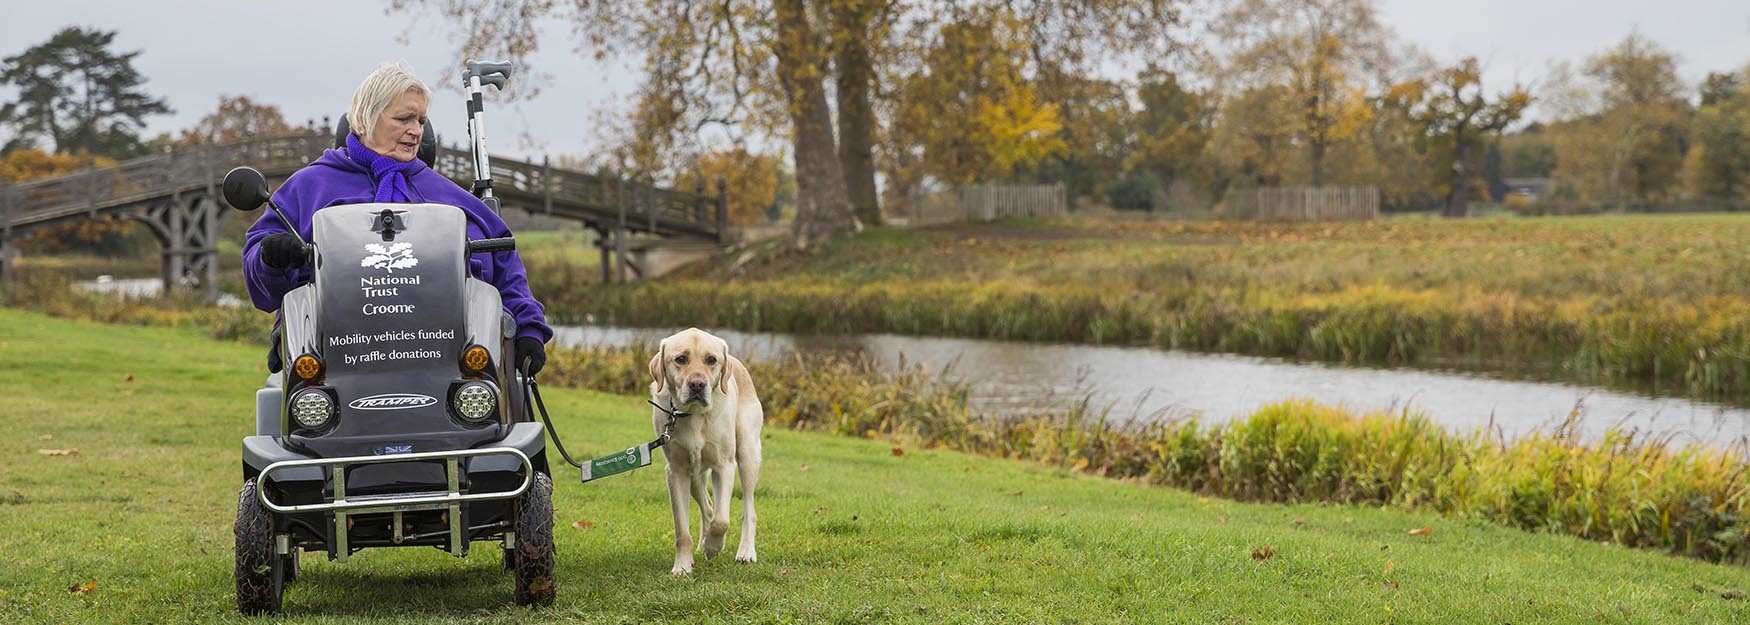 Dogs at Croome Park (National Trust) - credit James Dobson